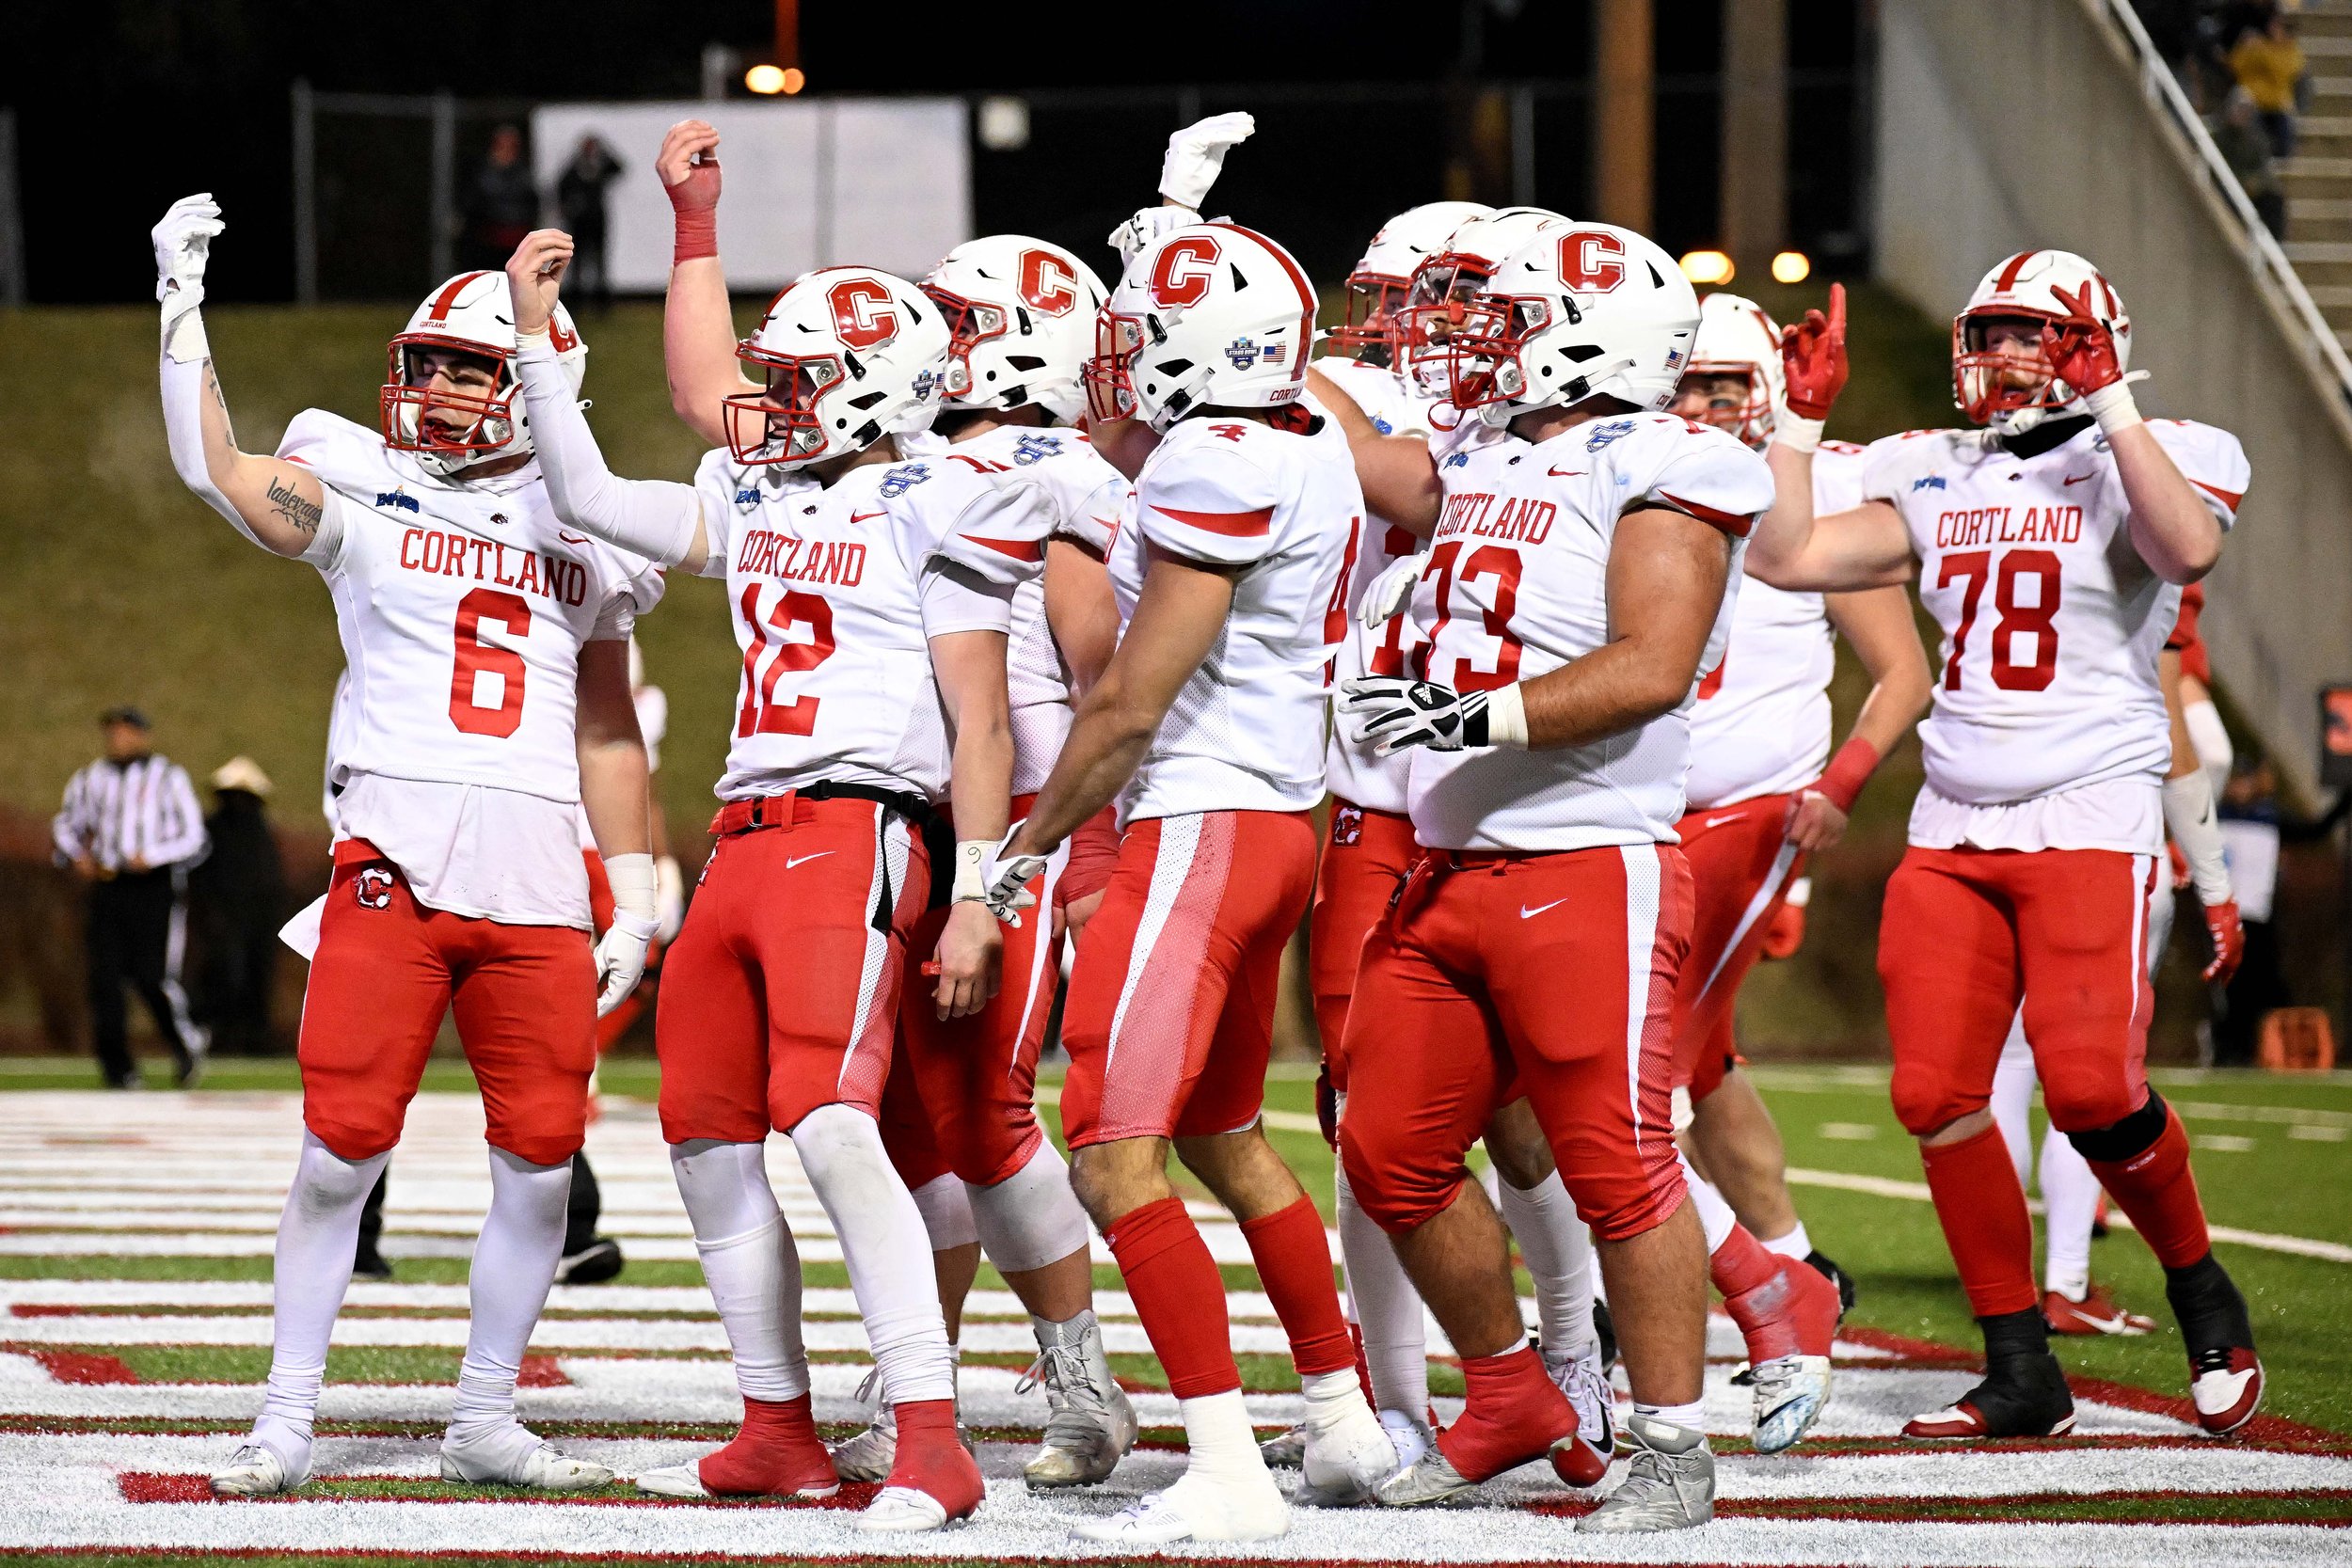  SALEM, VIRGINIA - DECEMBER 15:  Joe Iadevaio #6 of the Cortland Red Dragons celebrates with teammates after scoring a touchdown against the North Central Cardinals during the Division III Football Championship held at Salem Stadium on December 15, 2